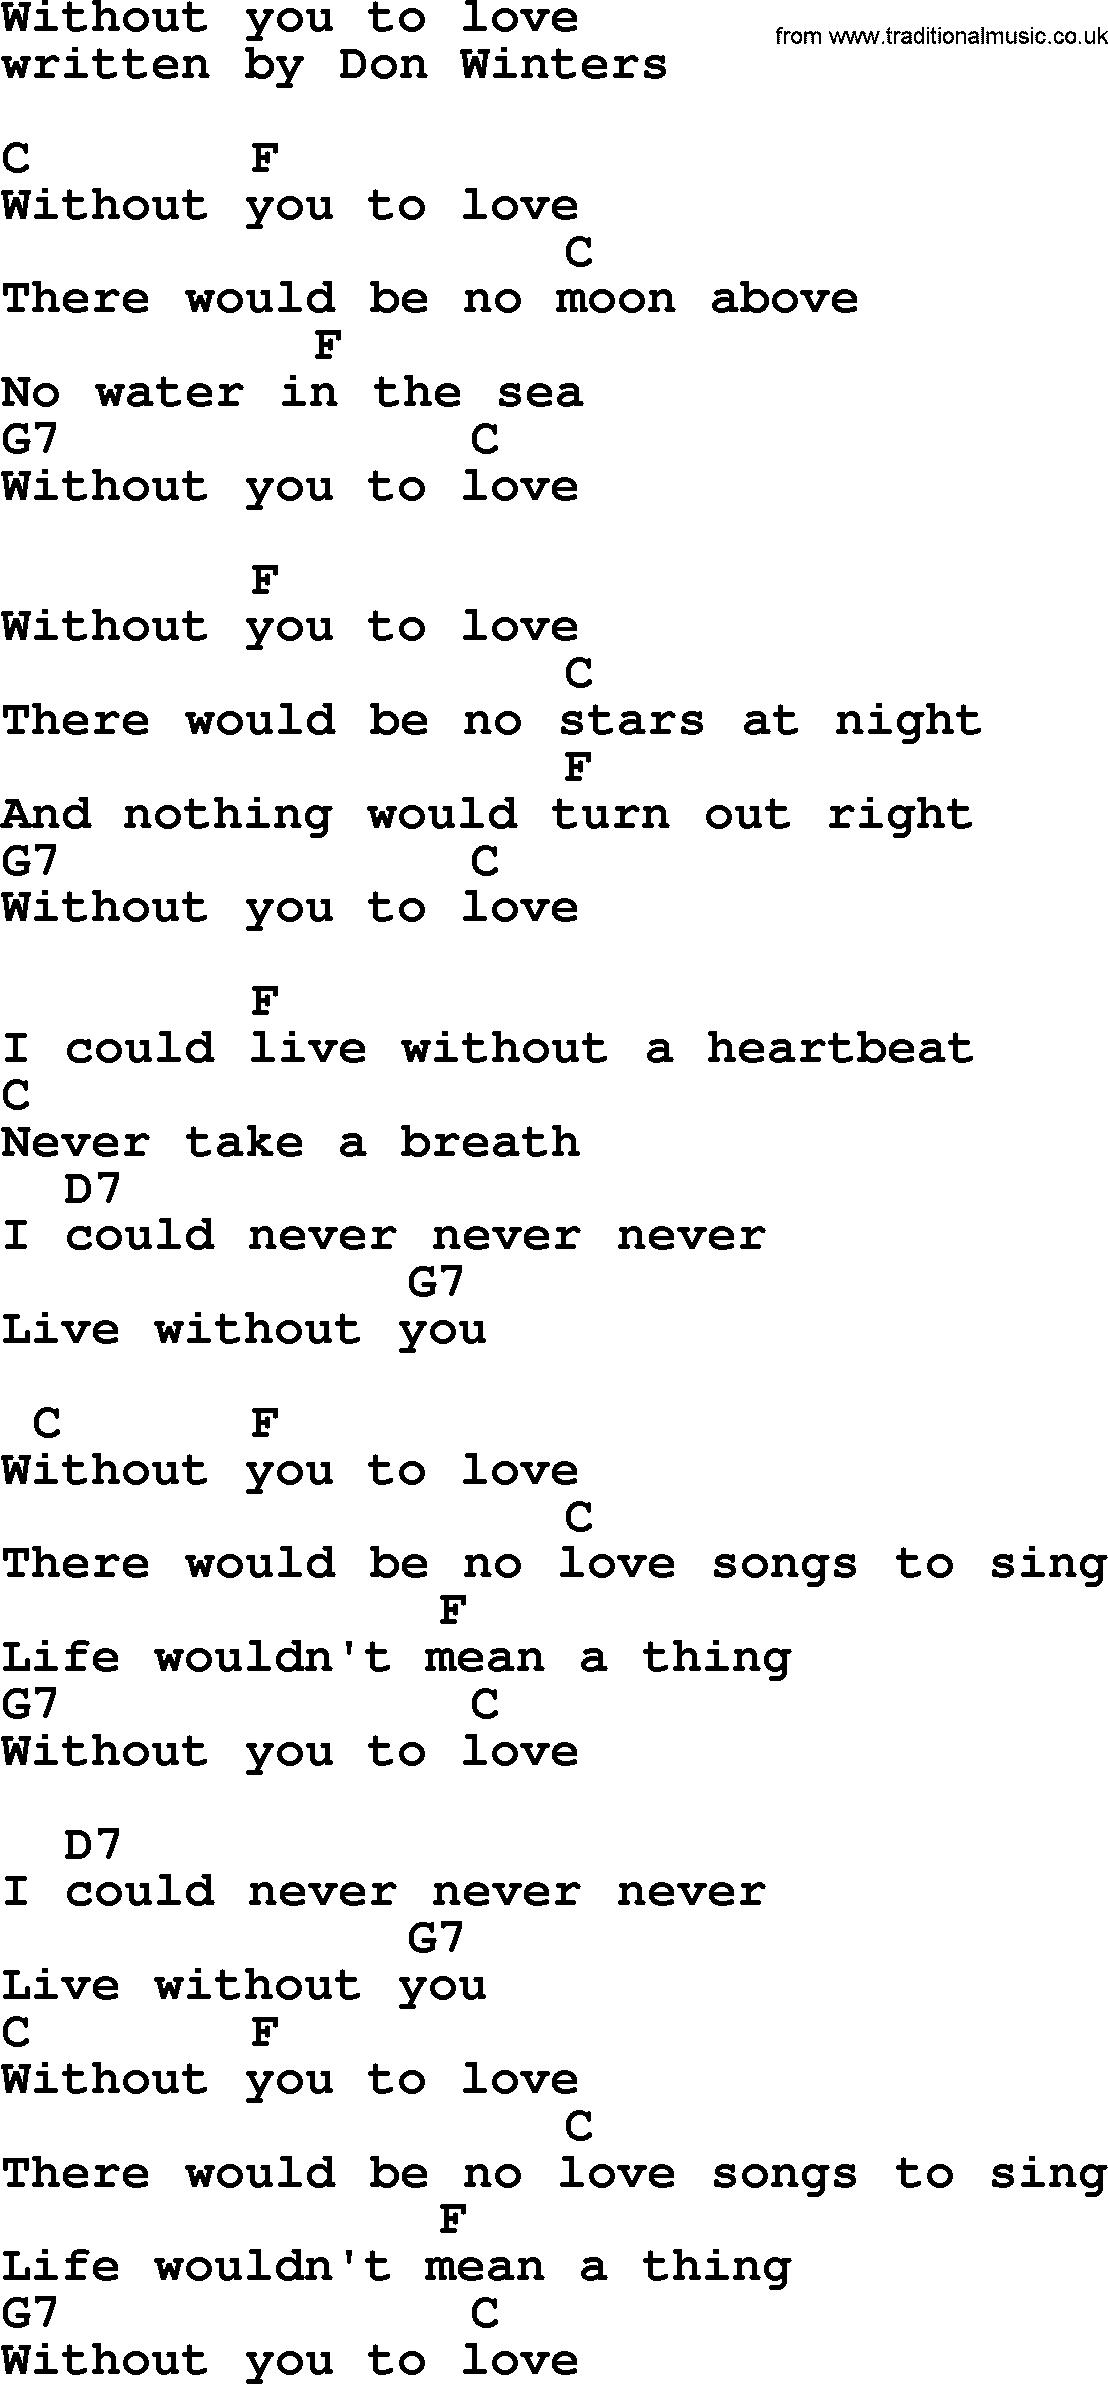 Marty Robbins song: Without You To Love, lyrics and chords